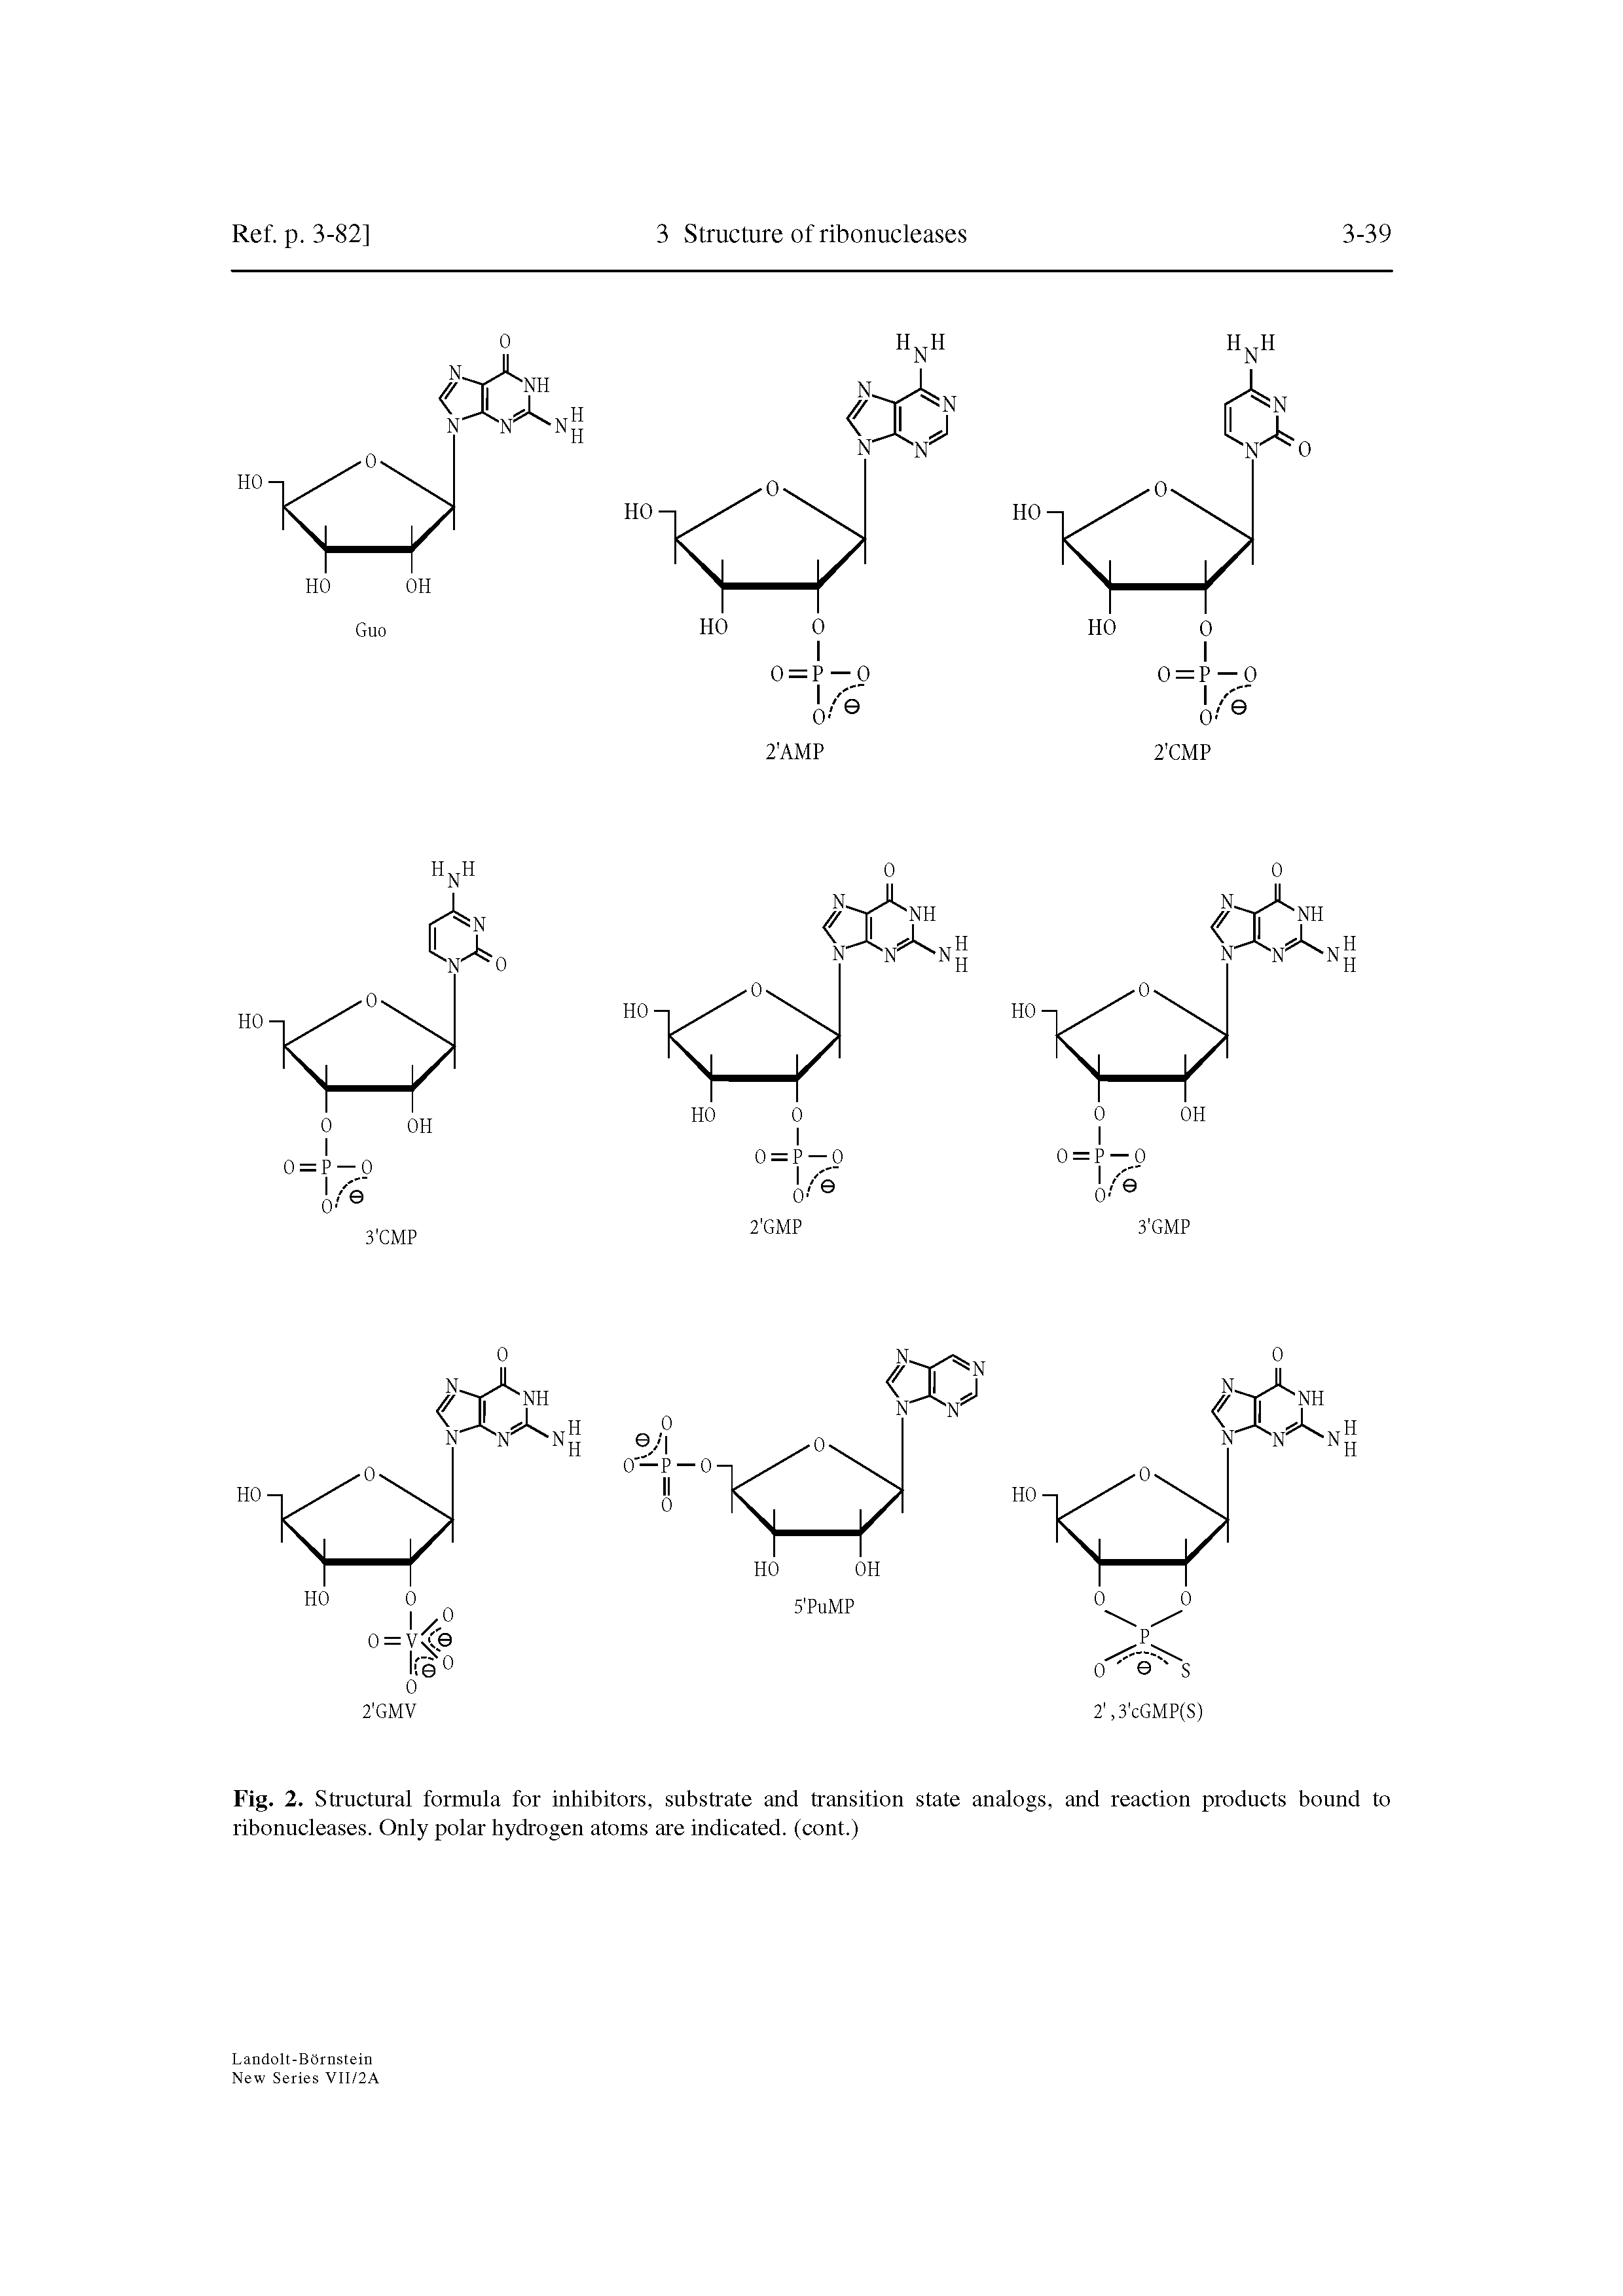 Fig. 2. Structural formula for inhibitors, substrate and transition state analogs, and reaction products bound to ribonucleases. Only polar hydrogen atoms are indicated, (cont.)...